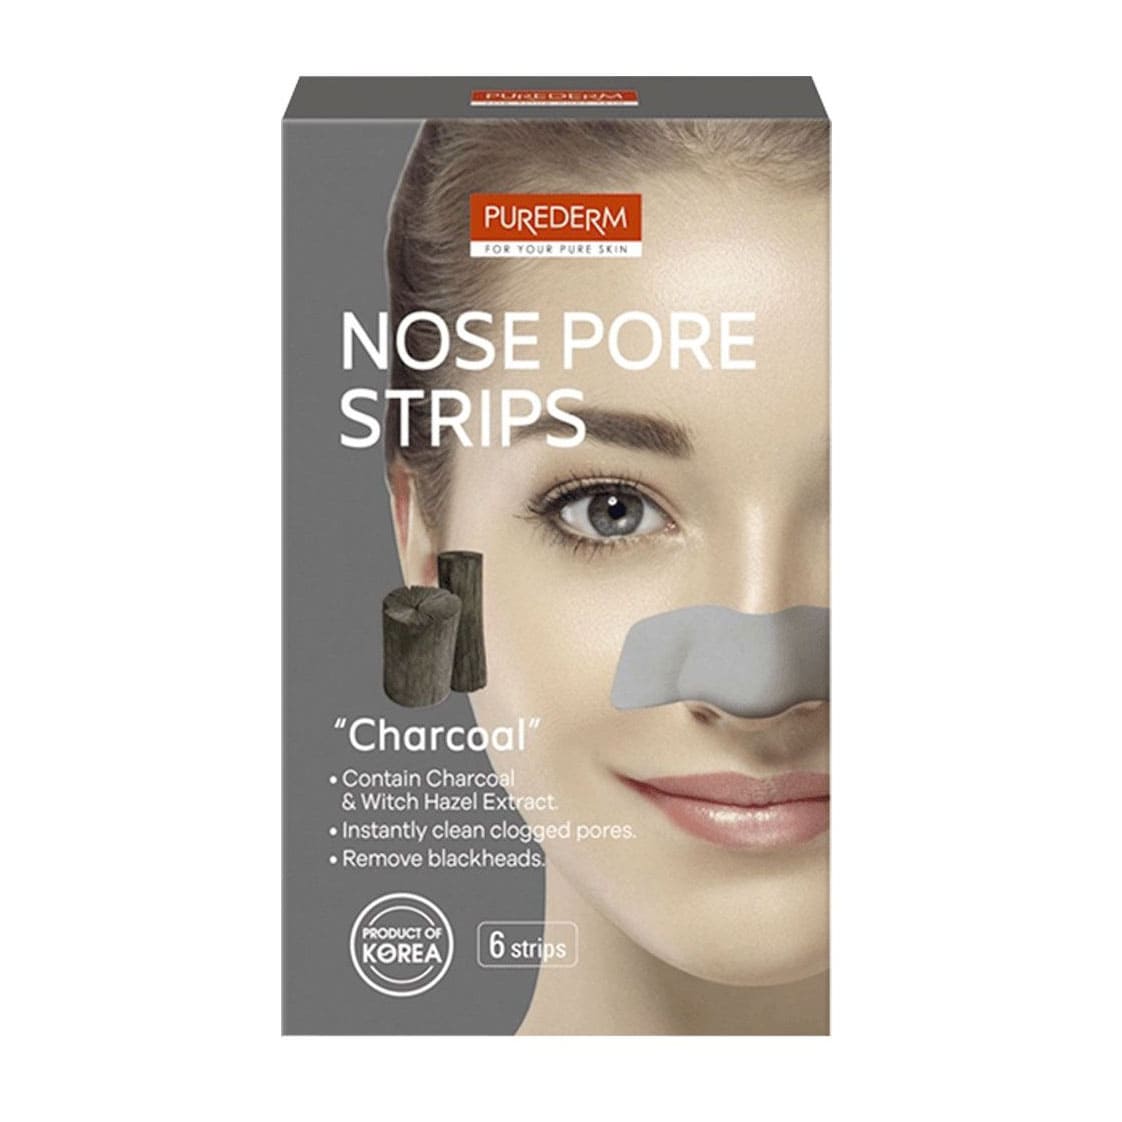 Purederm Nose Pore Strips Charcoal - 6pcs - Bloom Pharmacy